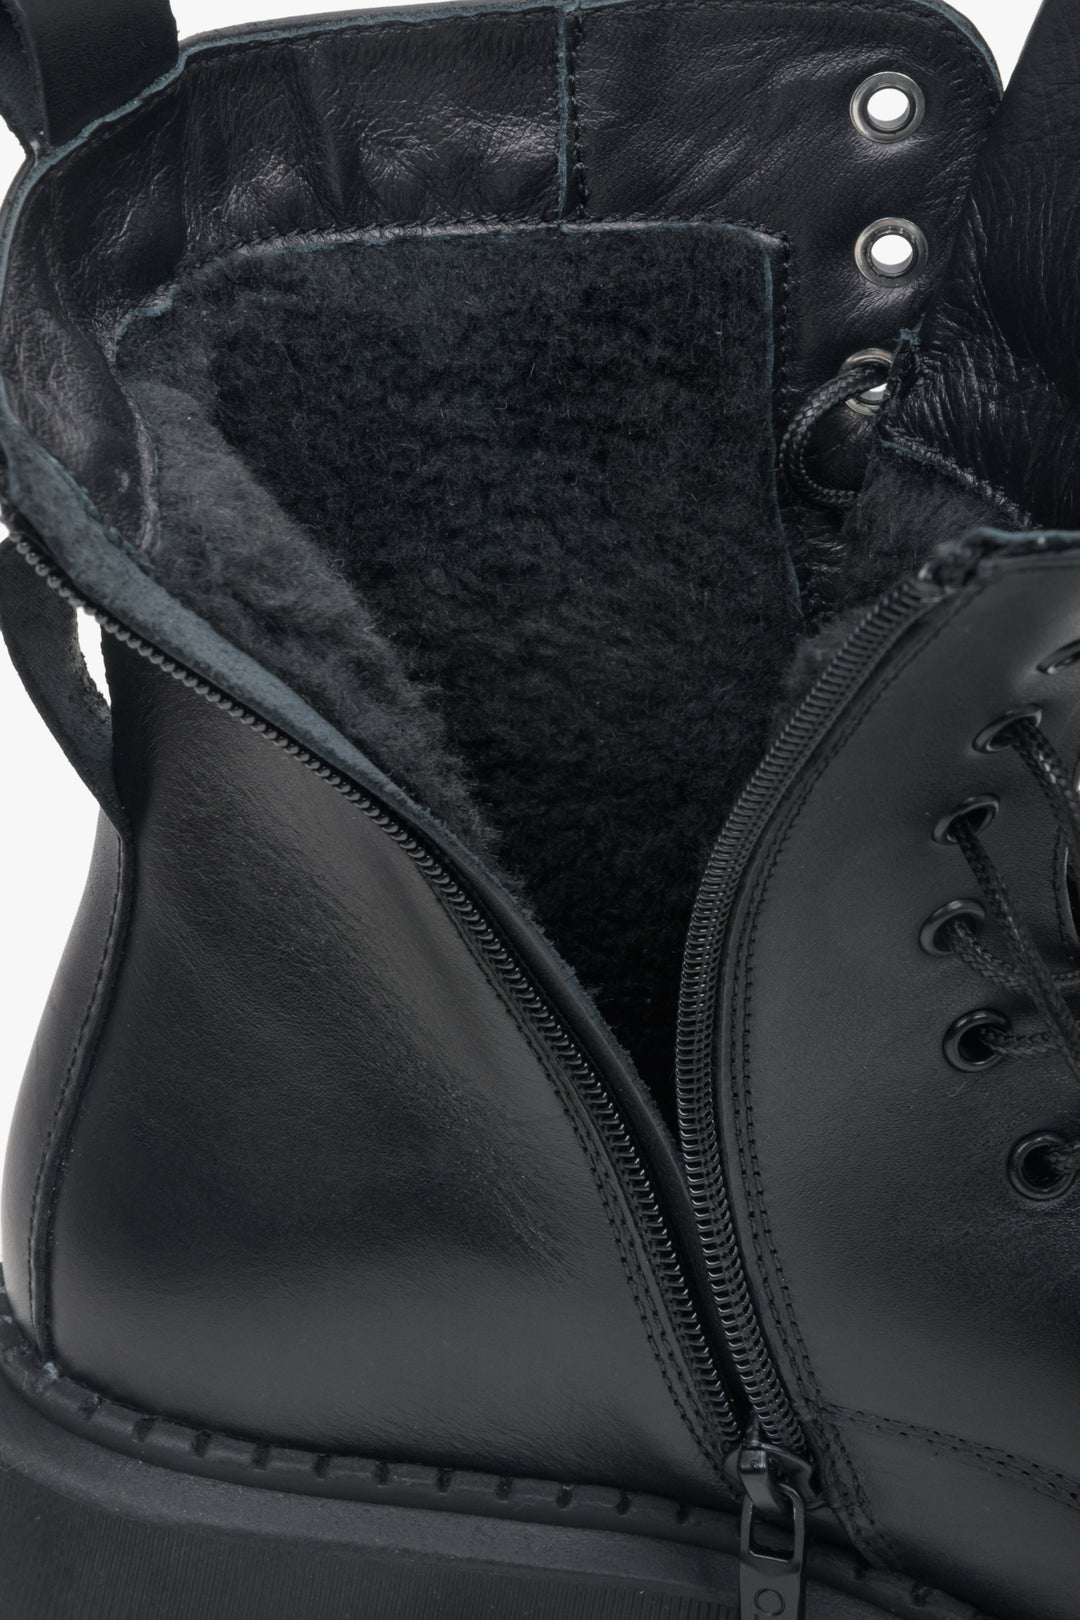 Estro women's black winter boots - close-up on the soft lining.